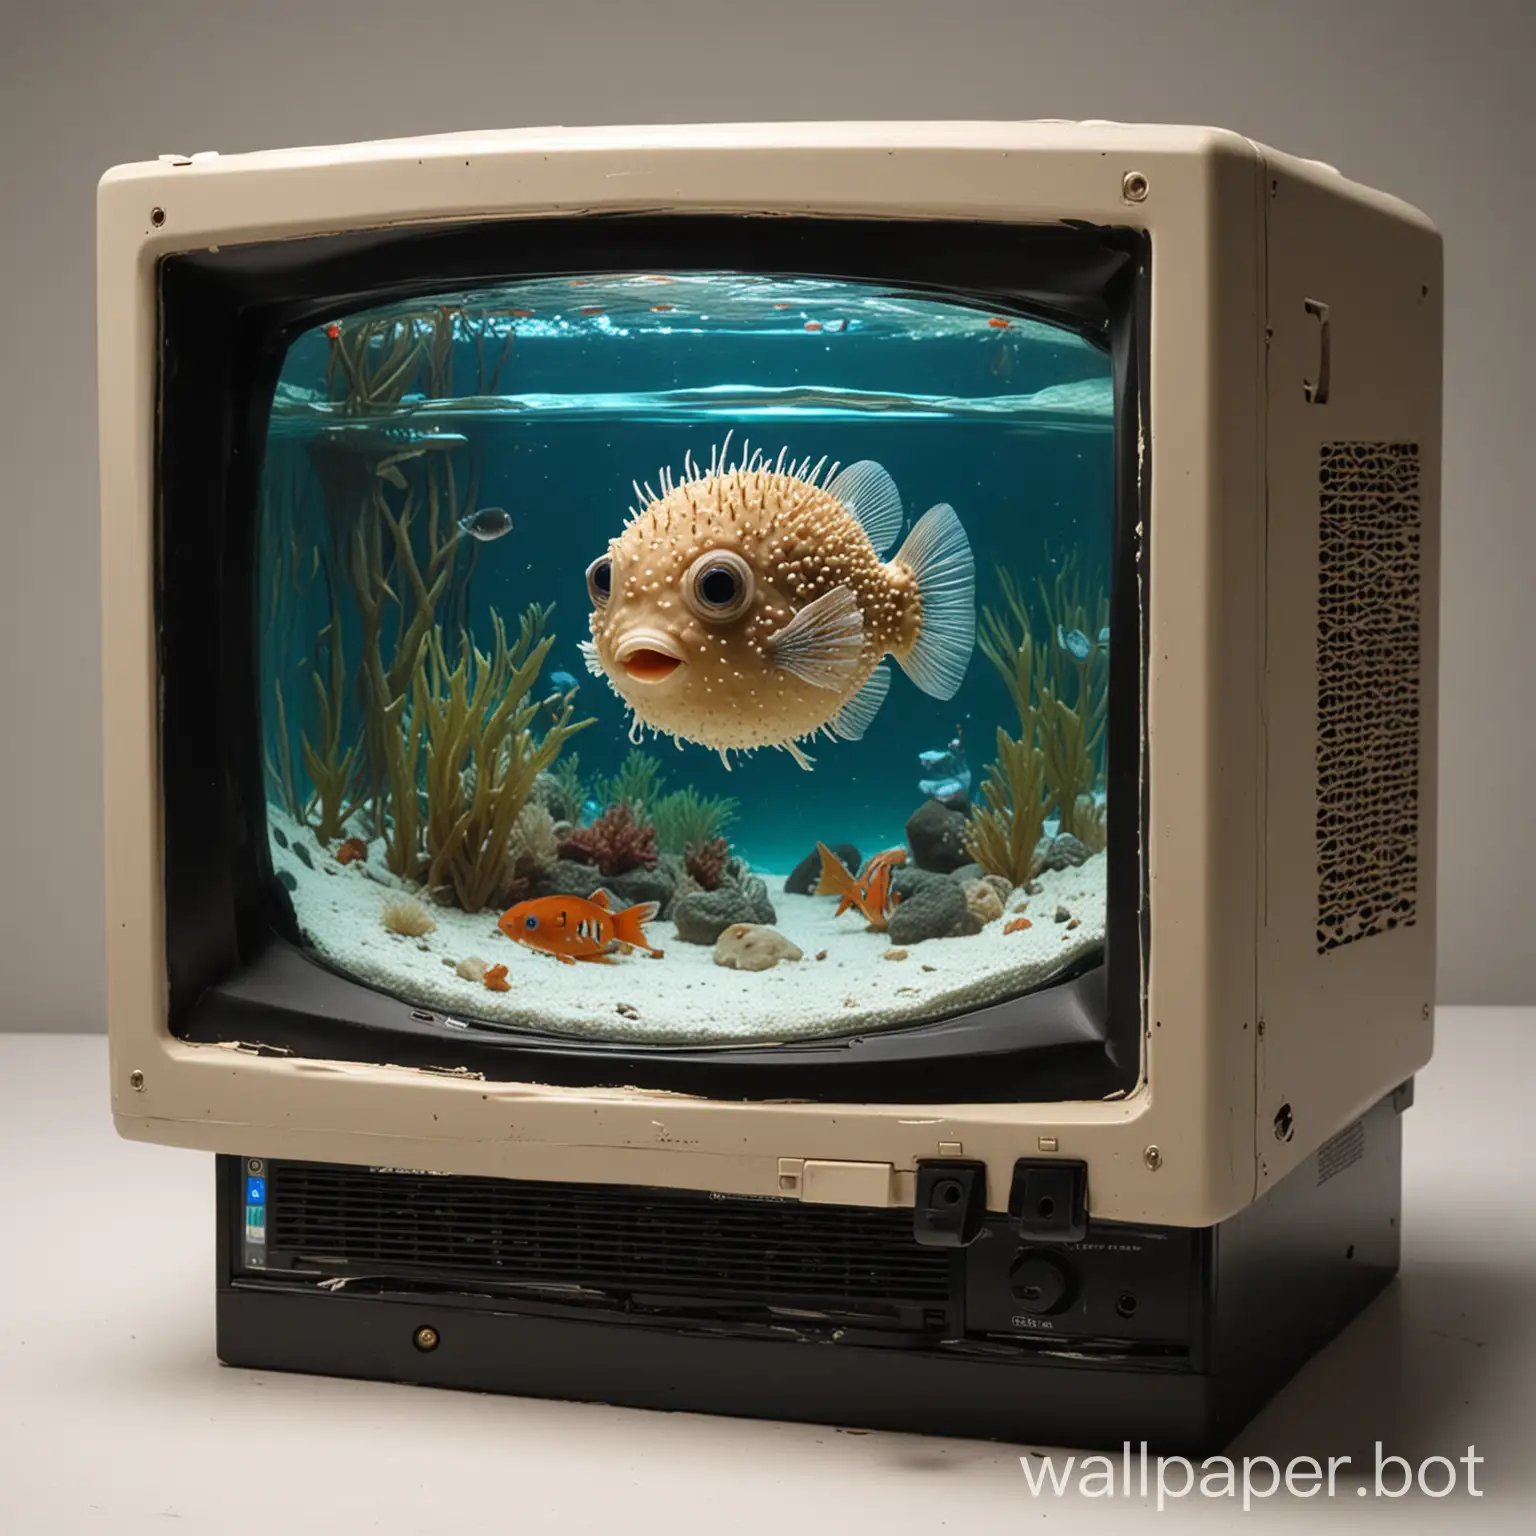 CRT monitor used as a fishbowl for a puffer fish.